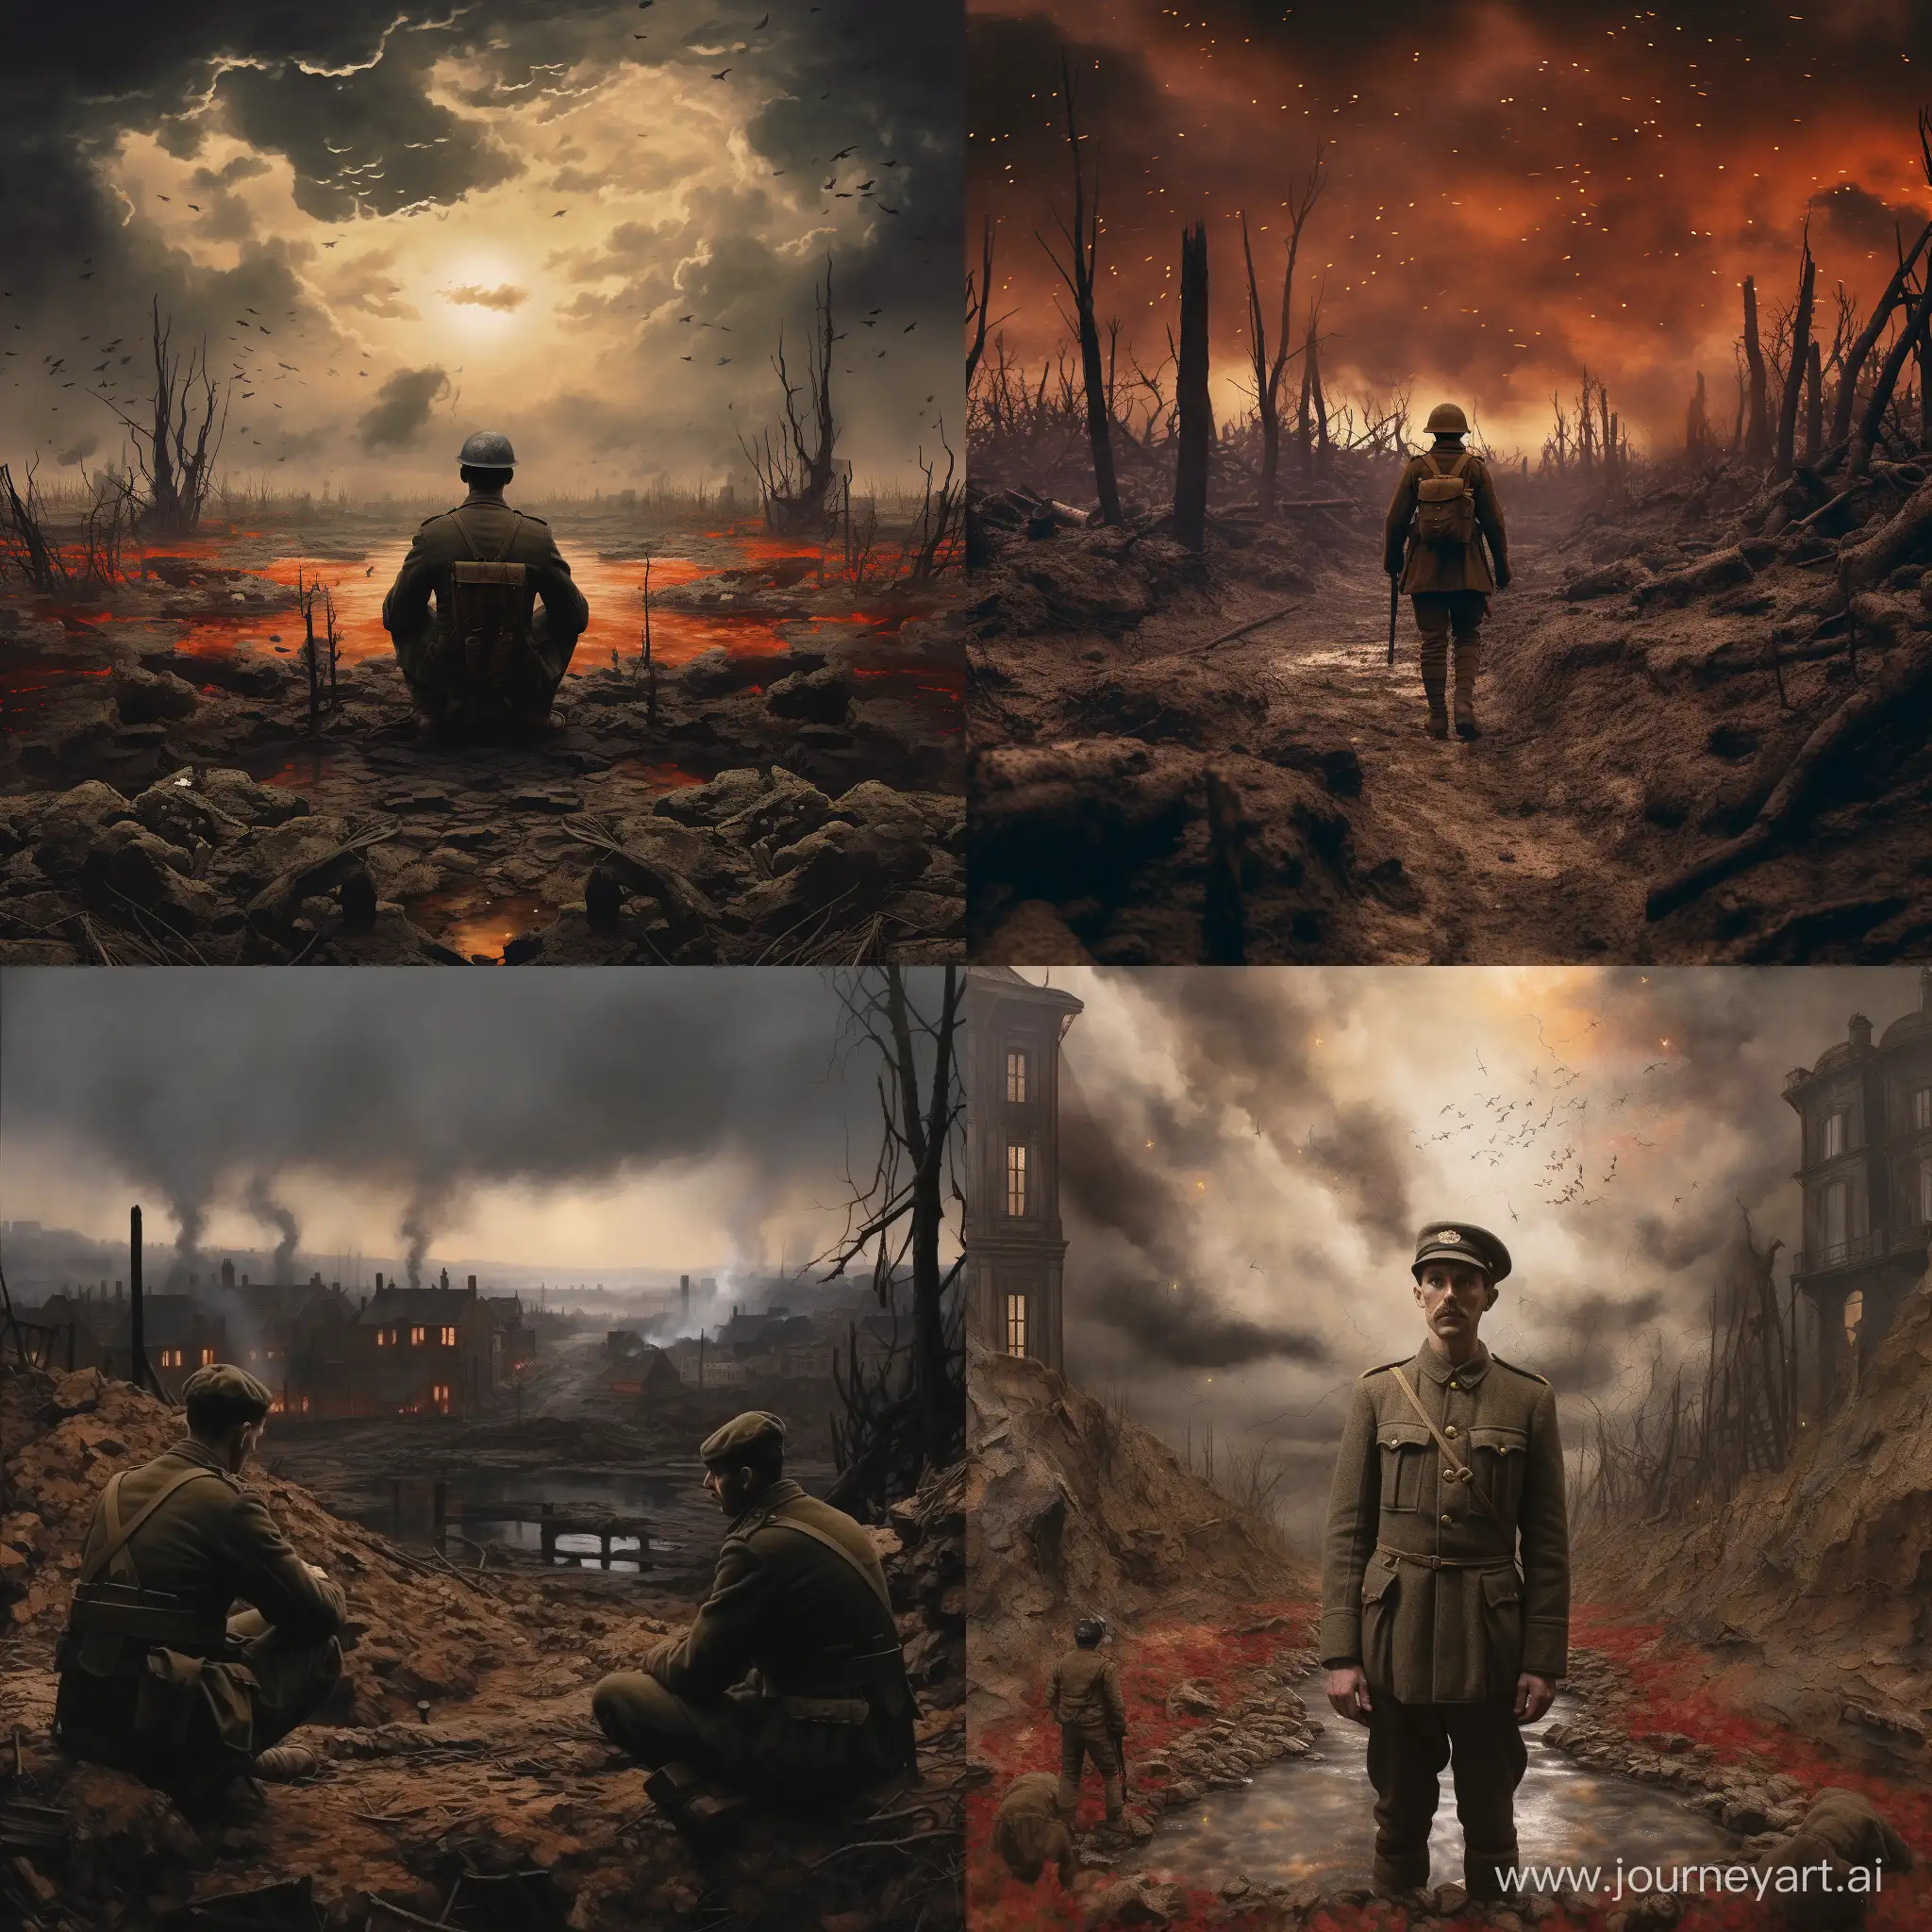 World-War-1-Soldiers-in-Action-Historical-11-Art